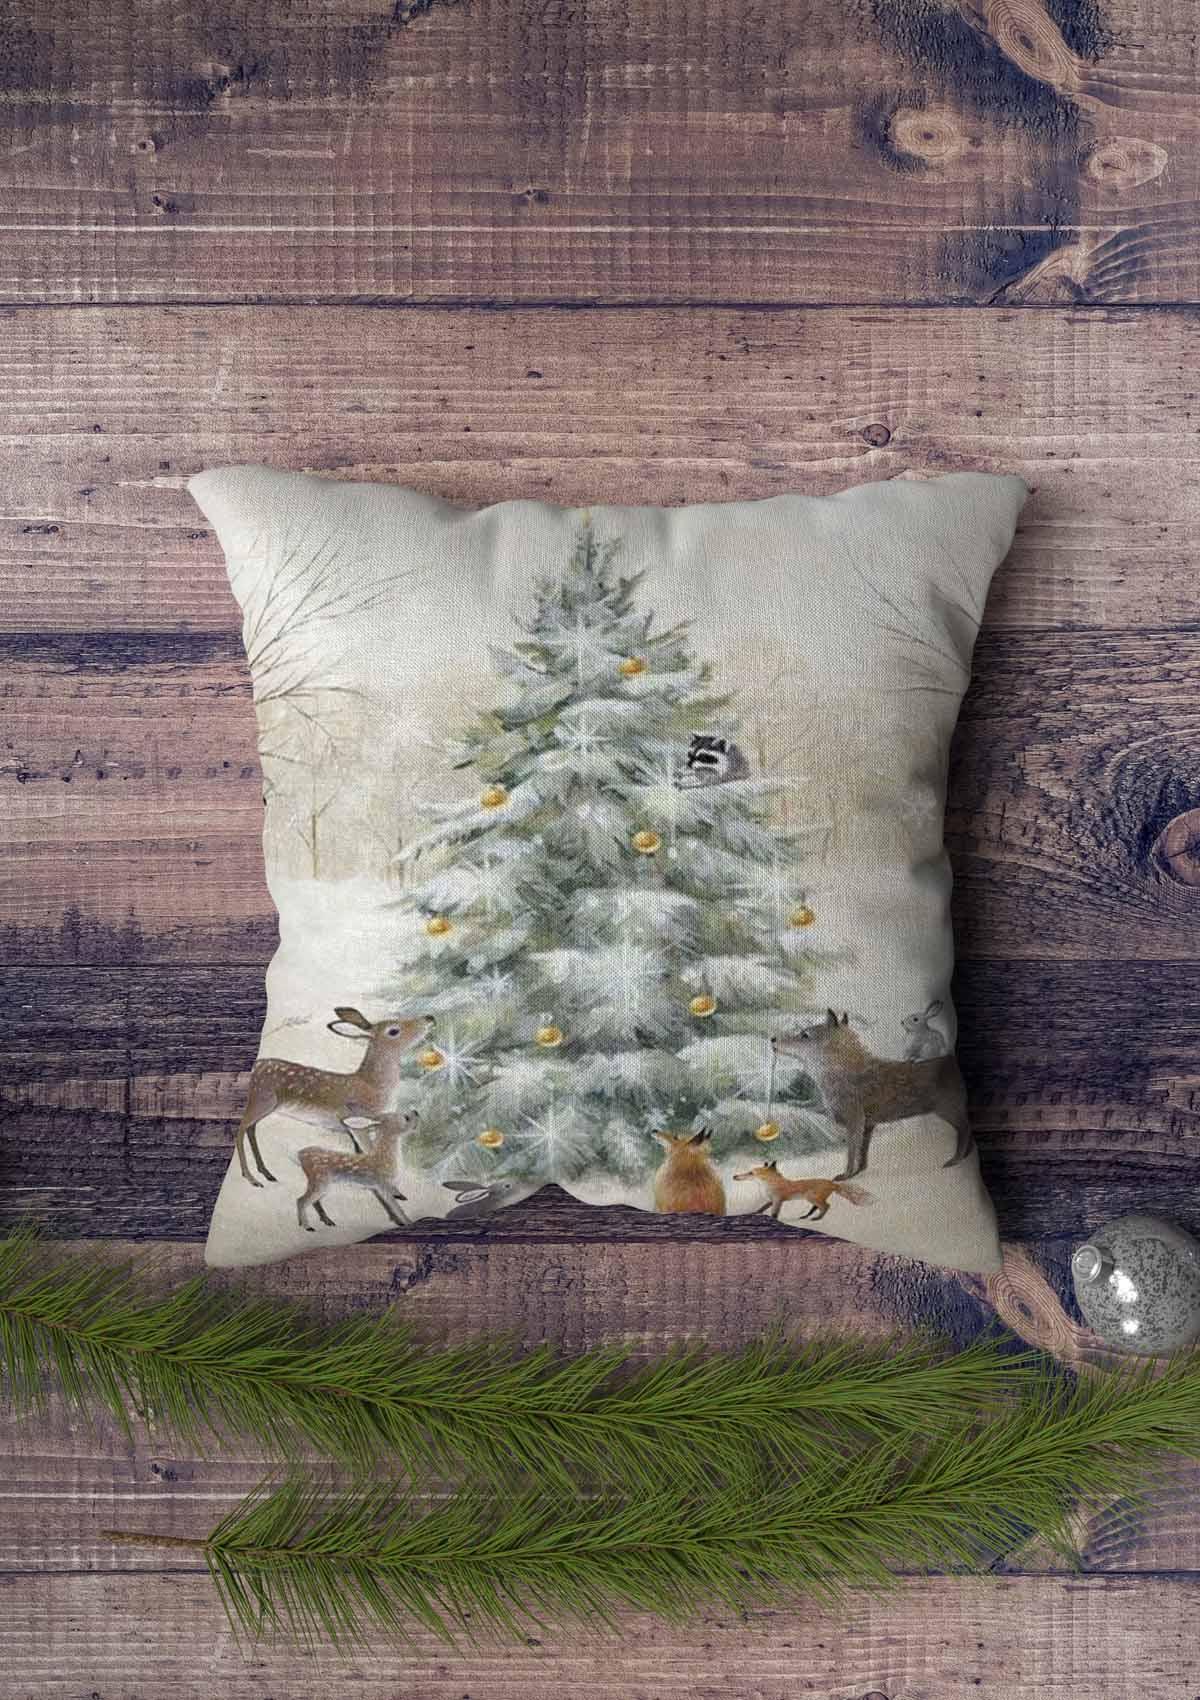 Christmas Cushion Covers Set of 4 - A complete set of 4 Christmas-themed cushion covers, perfect for elevating your festive home decor. Explore a variety of holiday designs to complete your holiday look.